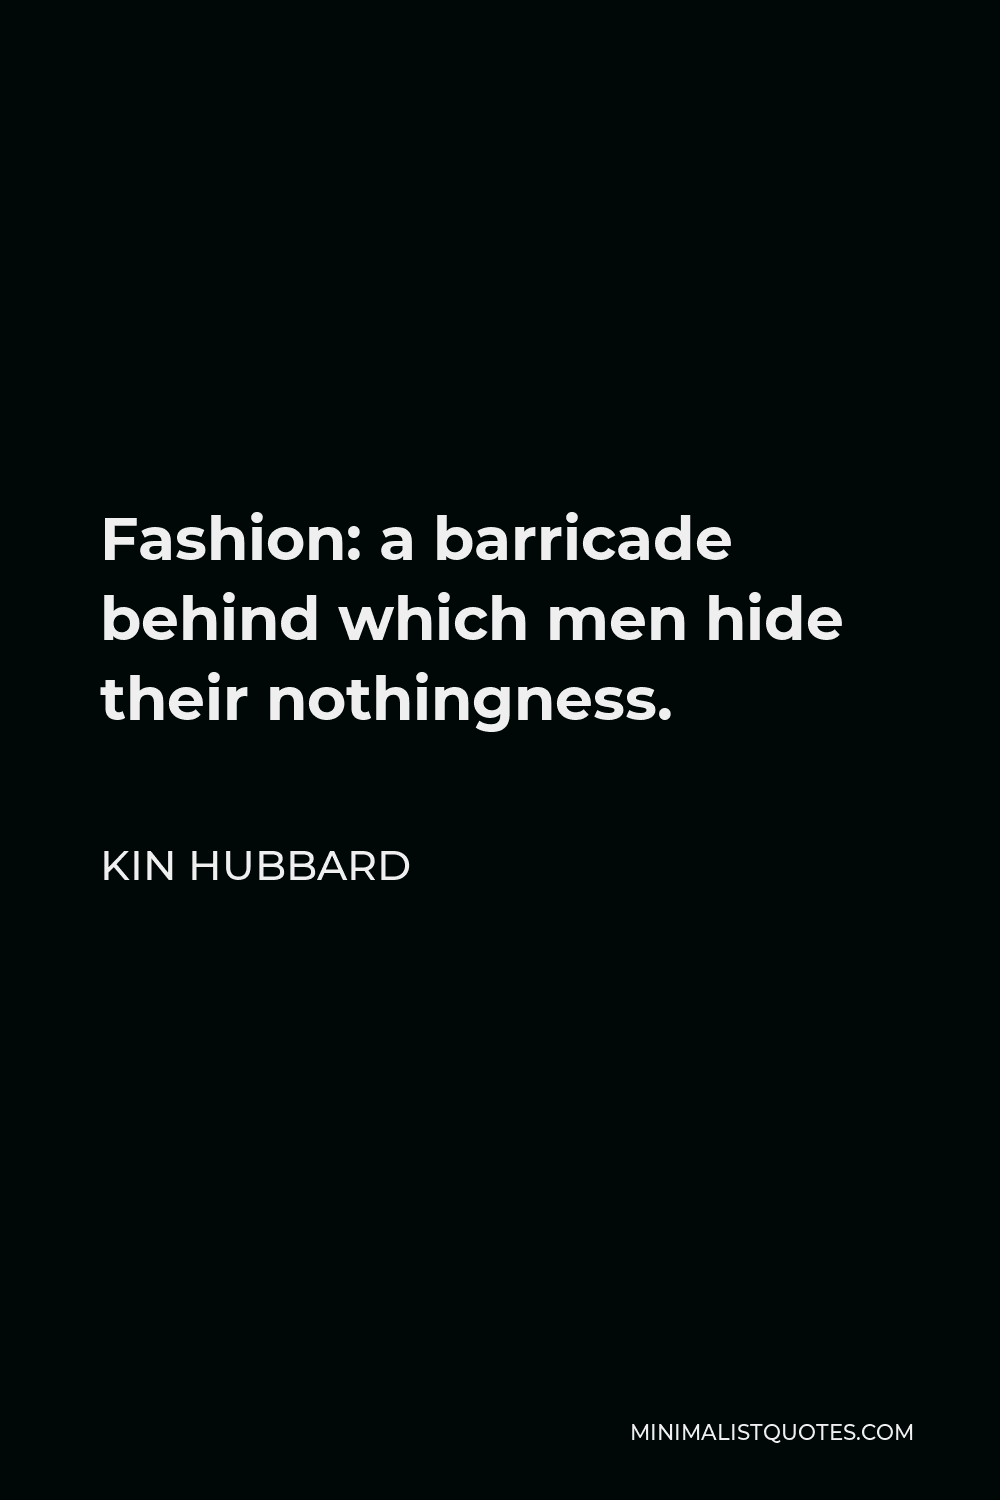 Kin Hubbard Quote - Fashion: a barricade behind which men hide their nothingness.